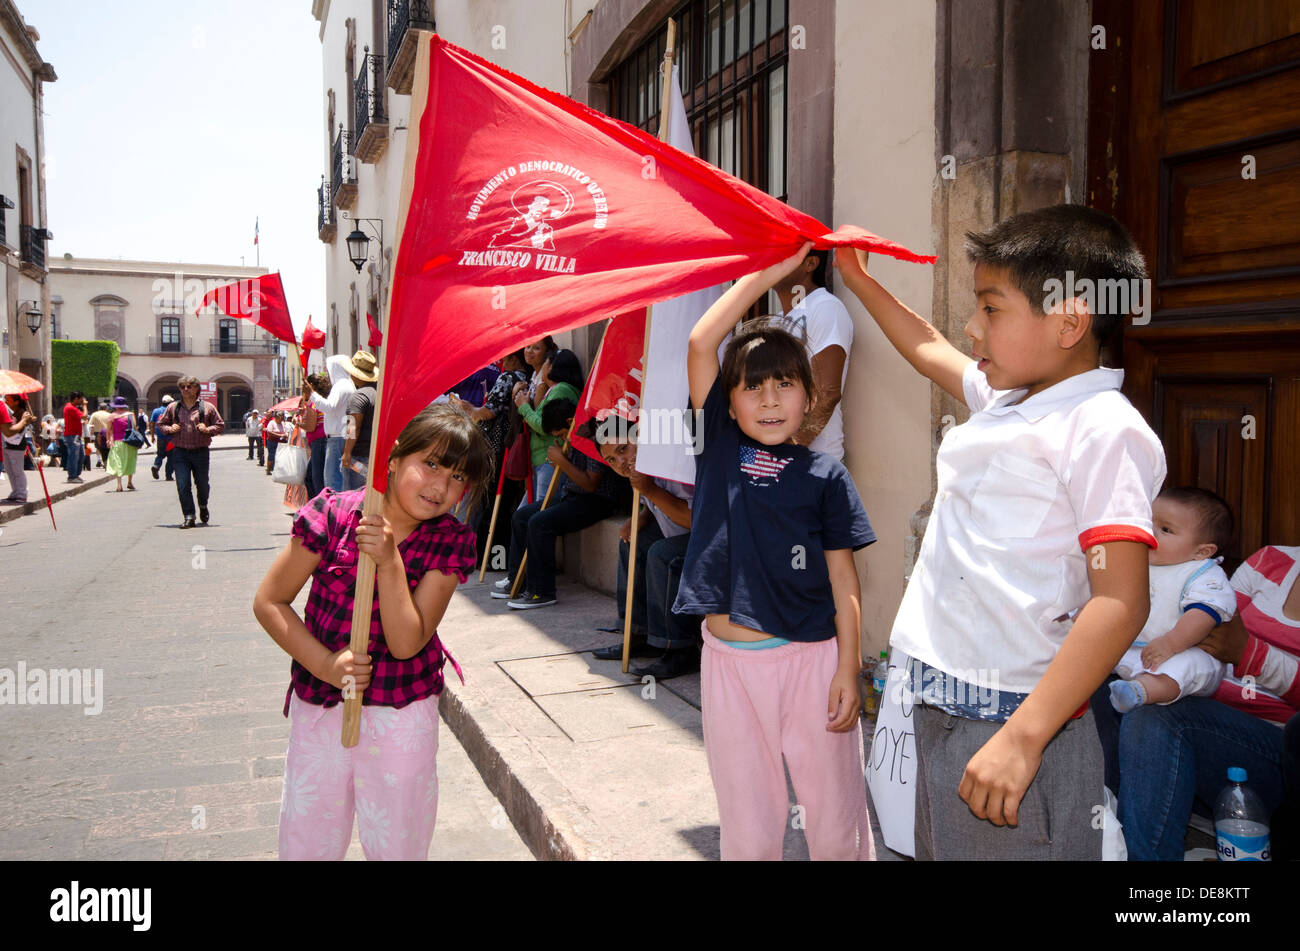 Children holding a banner during a street protest in the streets of Queretaro city, Mexico. Stock Photo